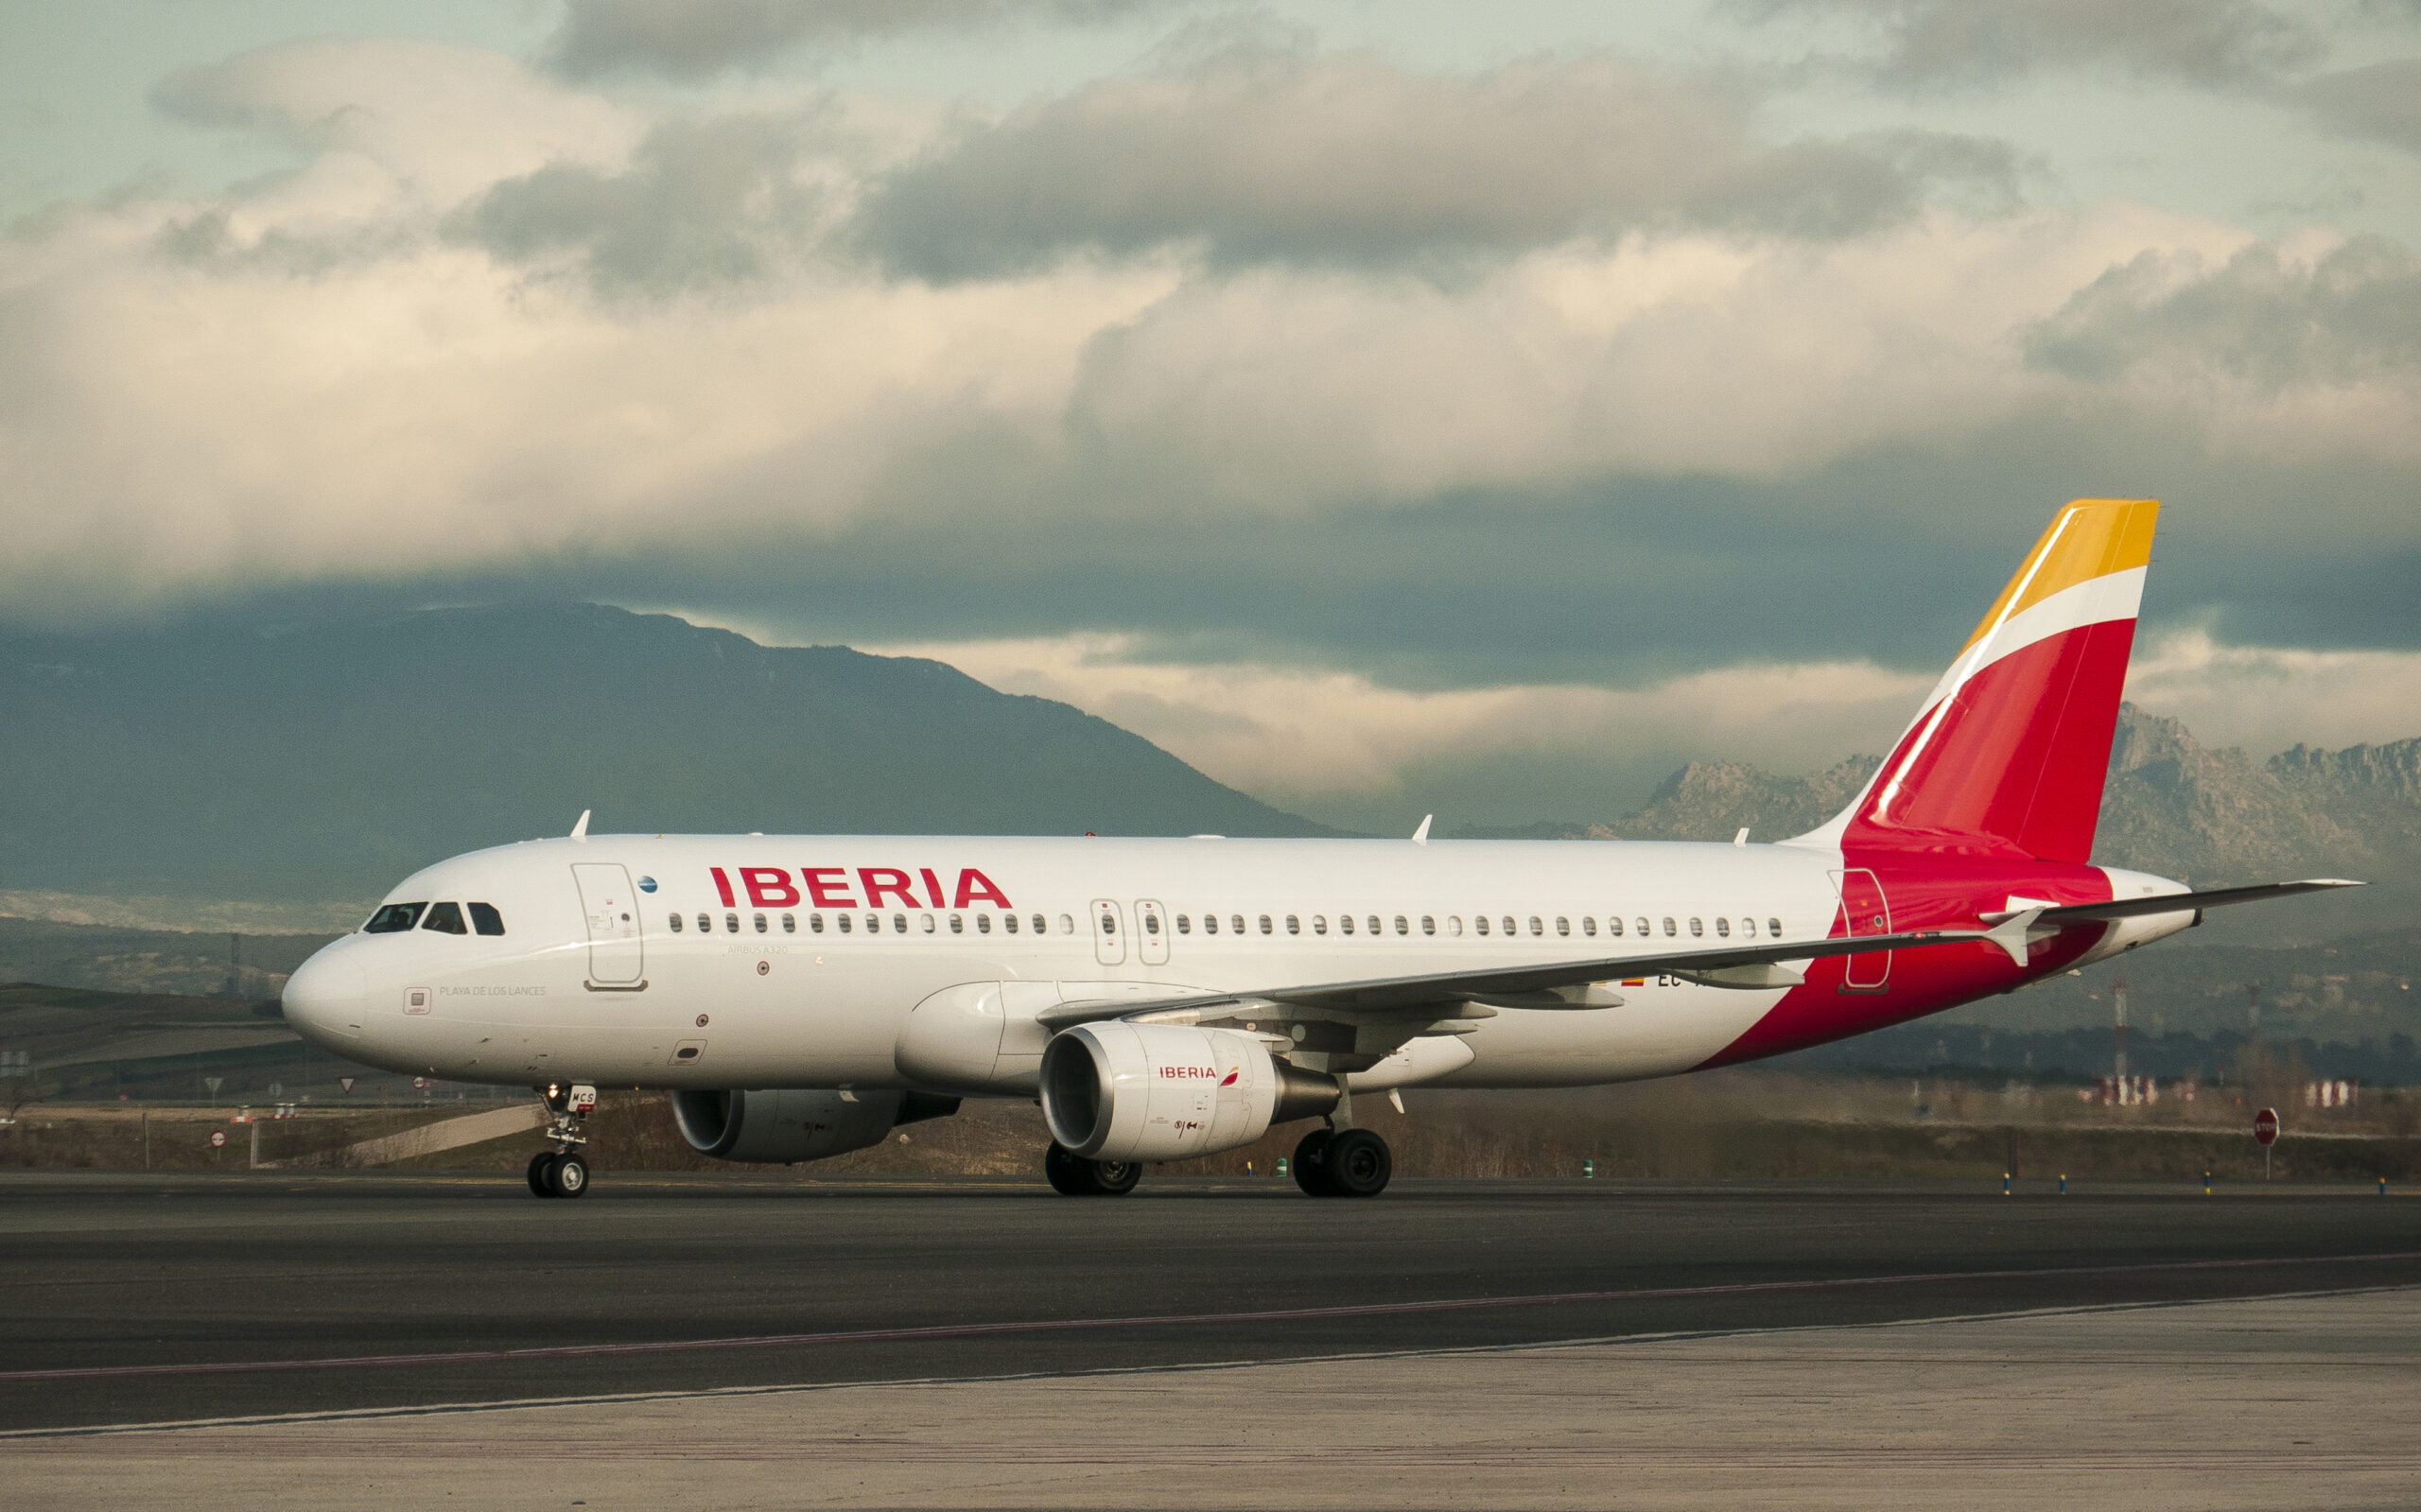 From their Madrid hub, Iberia fly to over 130 destinations across Europe, Africa, the Middle East, North America and Latin America